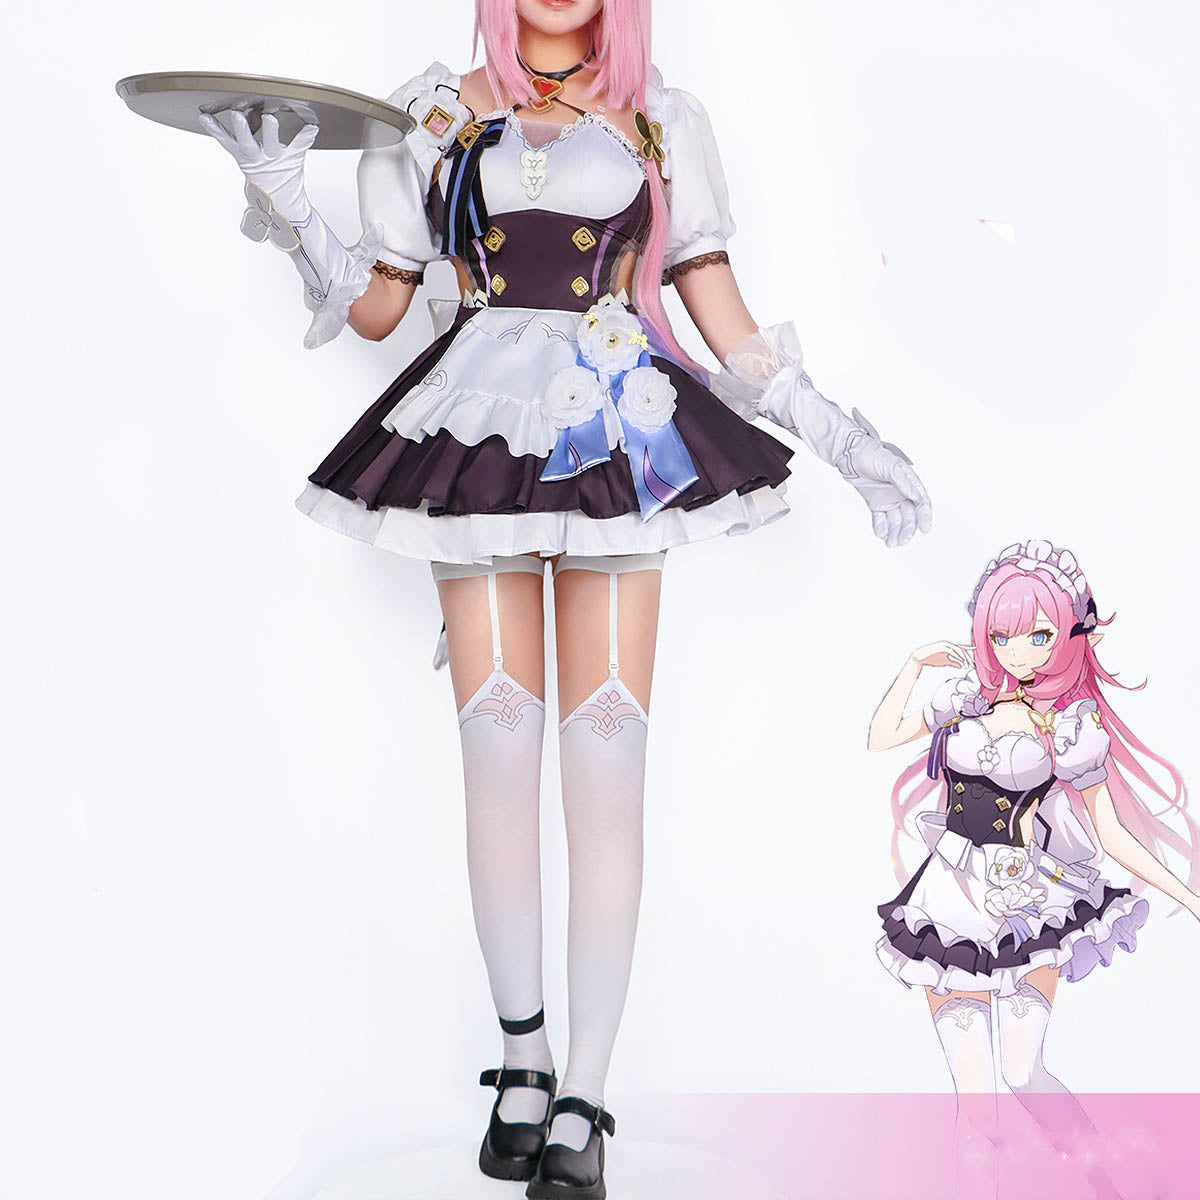 Rulercosplay Honkai Star Rail Elysia Cosplay Costume With Accessories For Cosplay Party